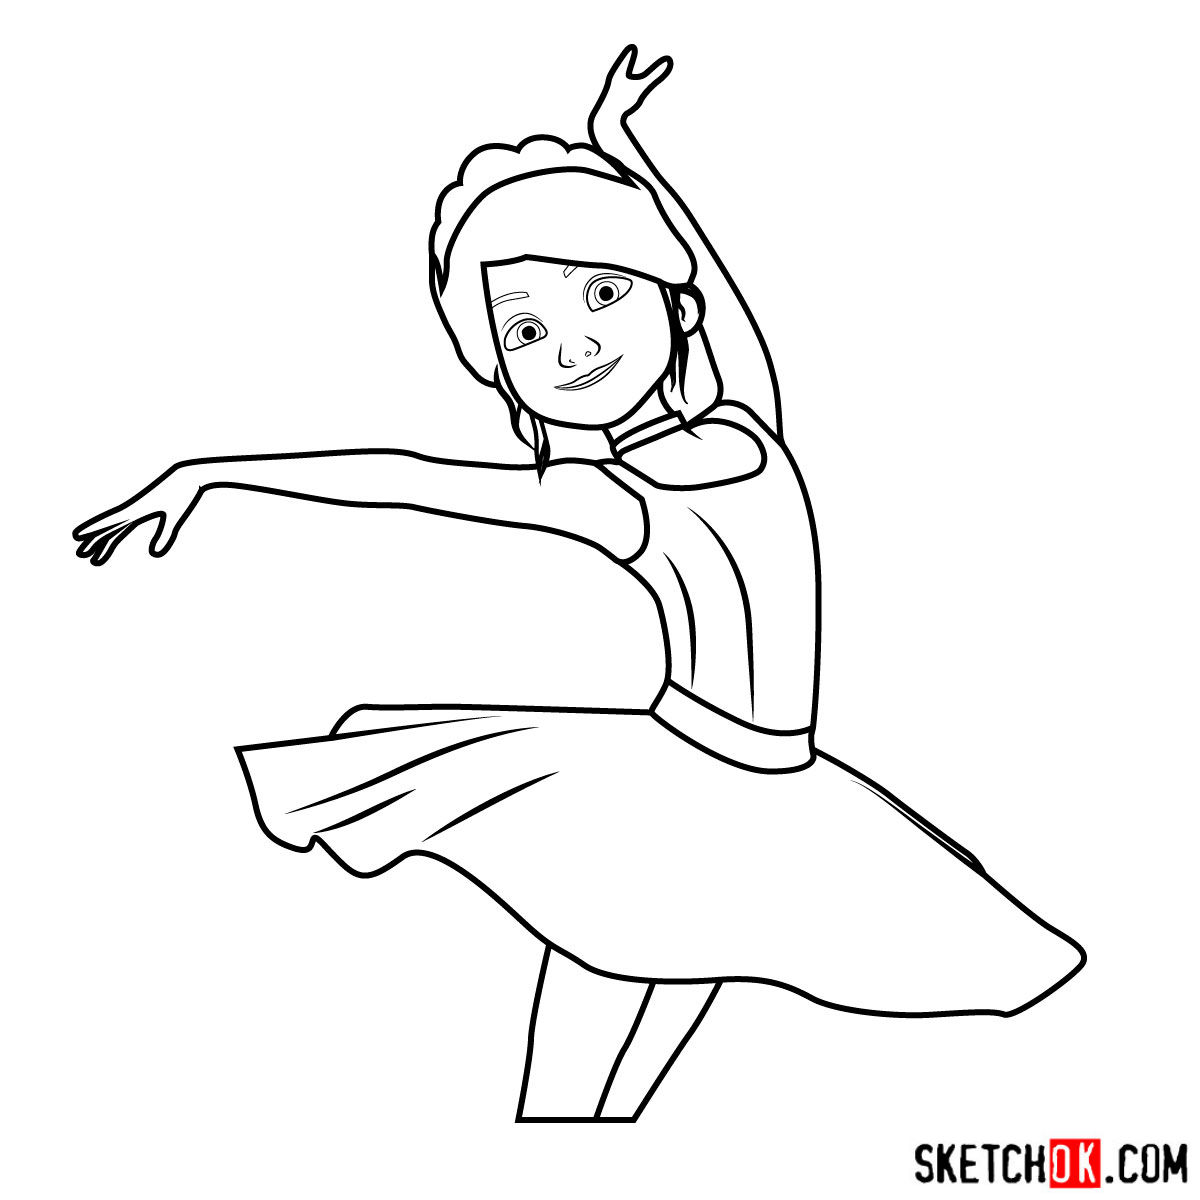 How to draw Felicie from Ballerina 2016 film - step 08